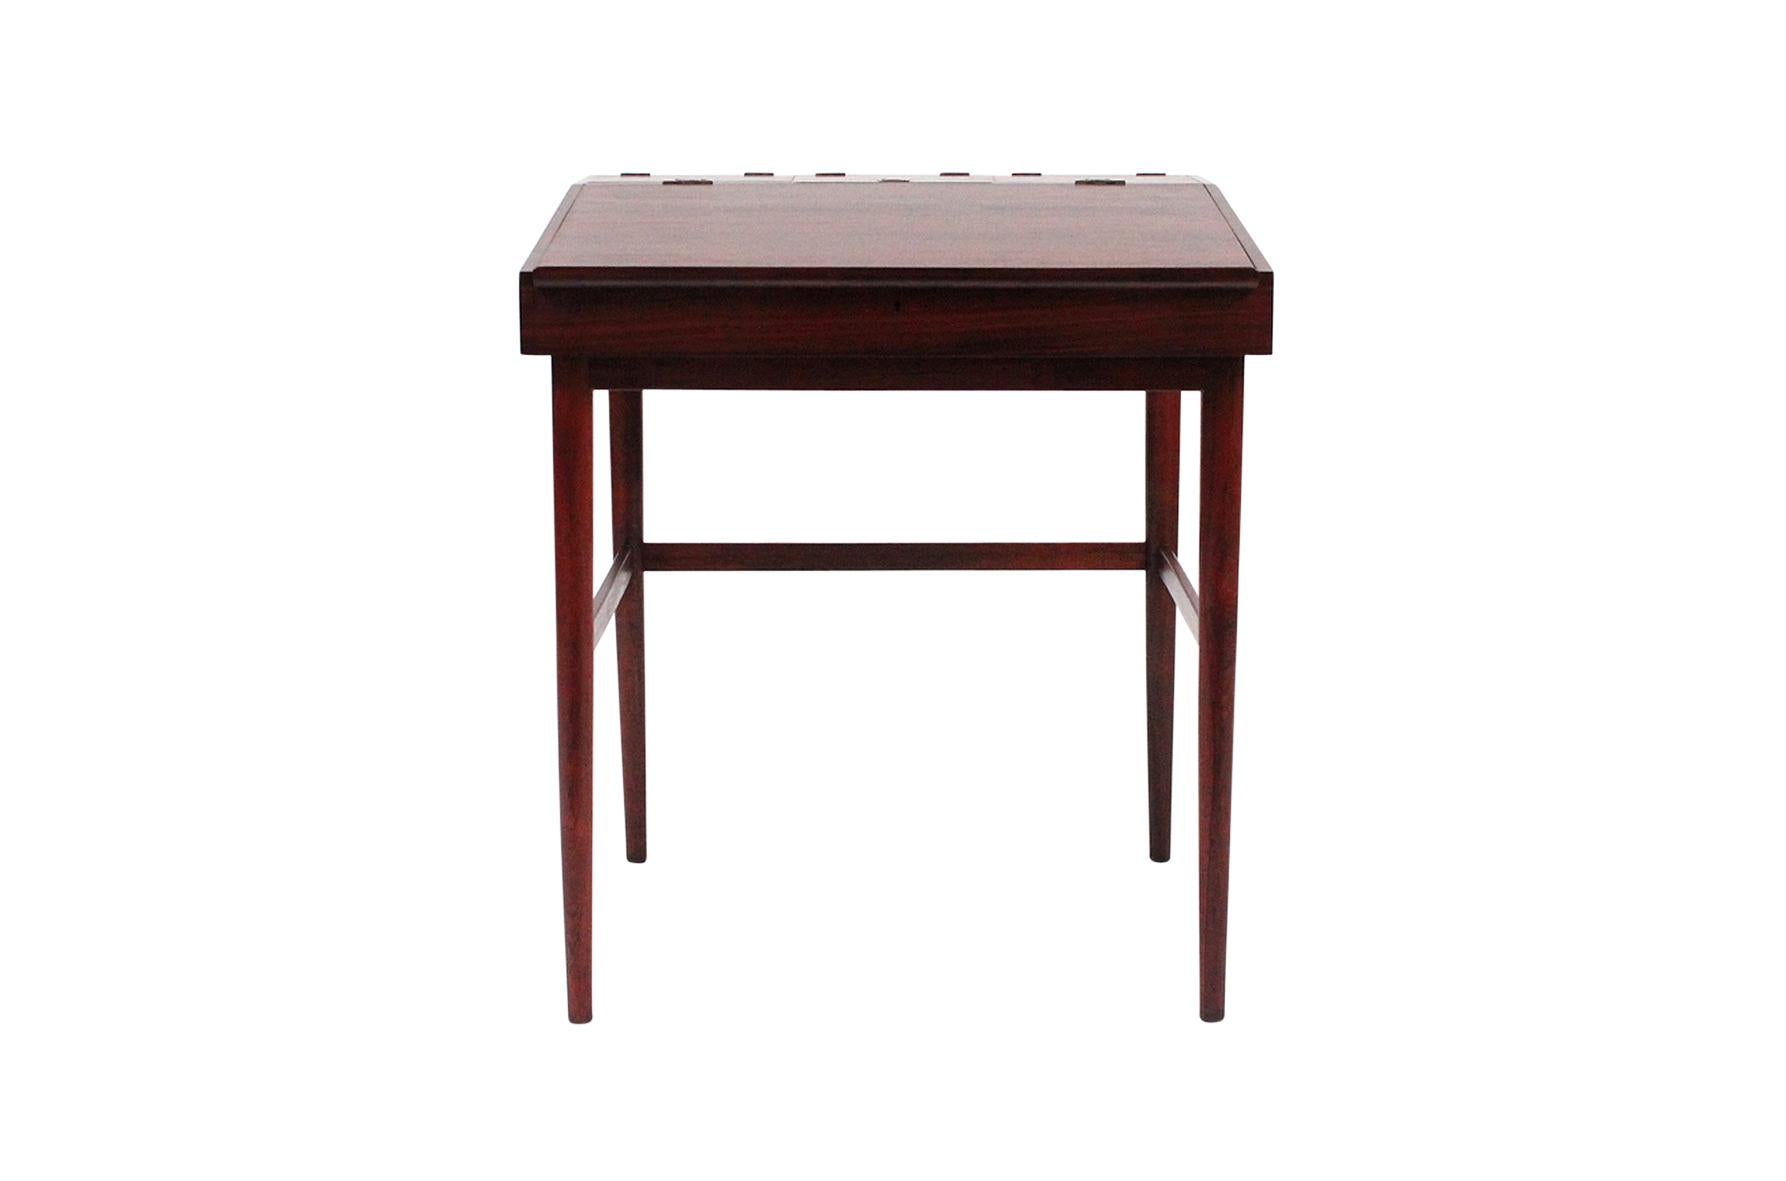 Rare rosewood writing desk by Finn Juhl for Niels Vodder, Denmark, 1942. This diminutive desk features a lift-top with open storage and three compartments with hinged tops. A rare and fine example in rosewood.